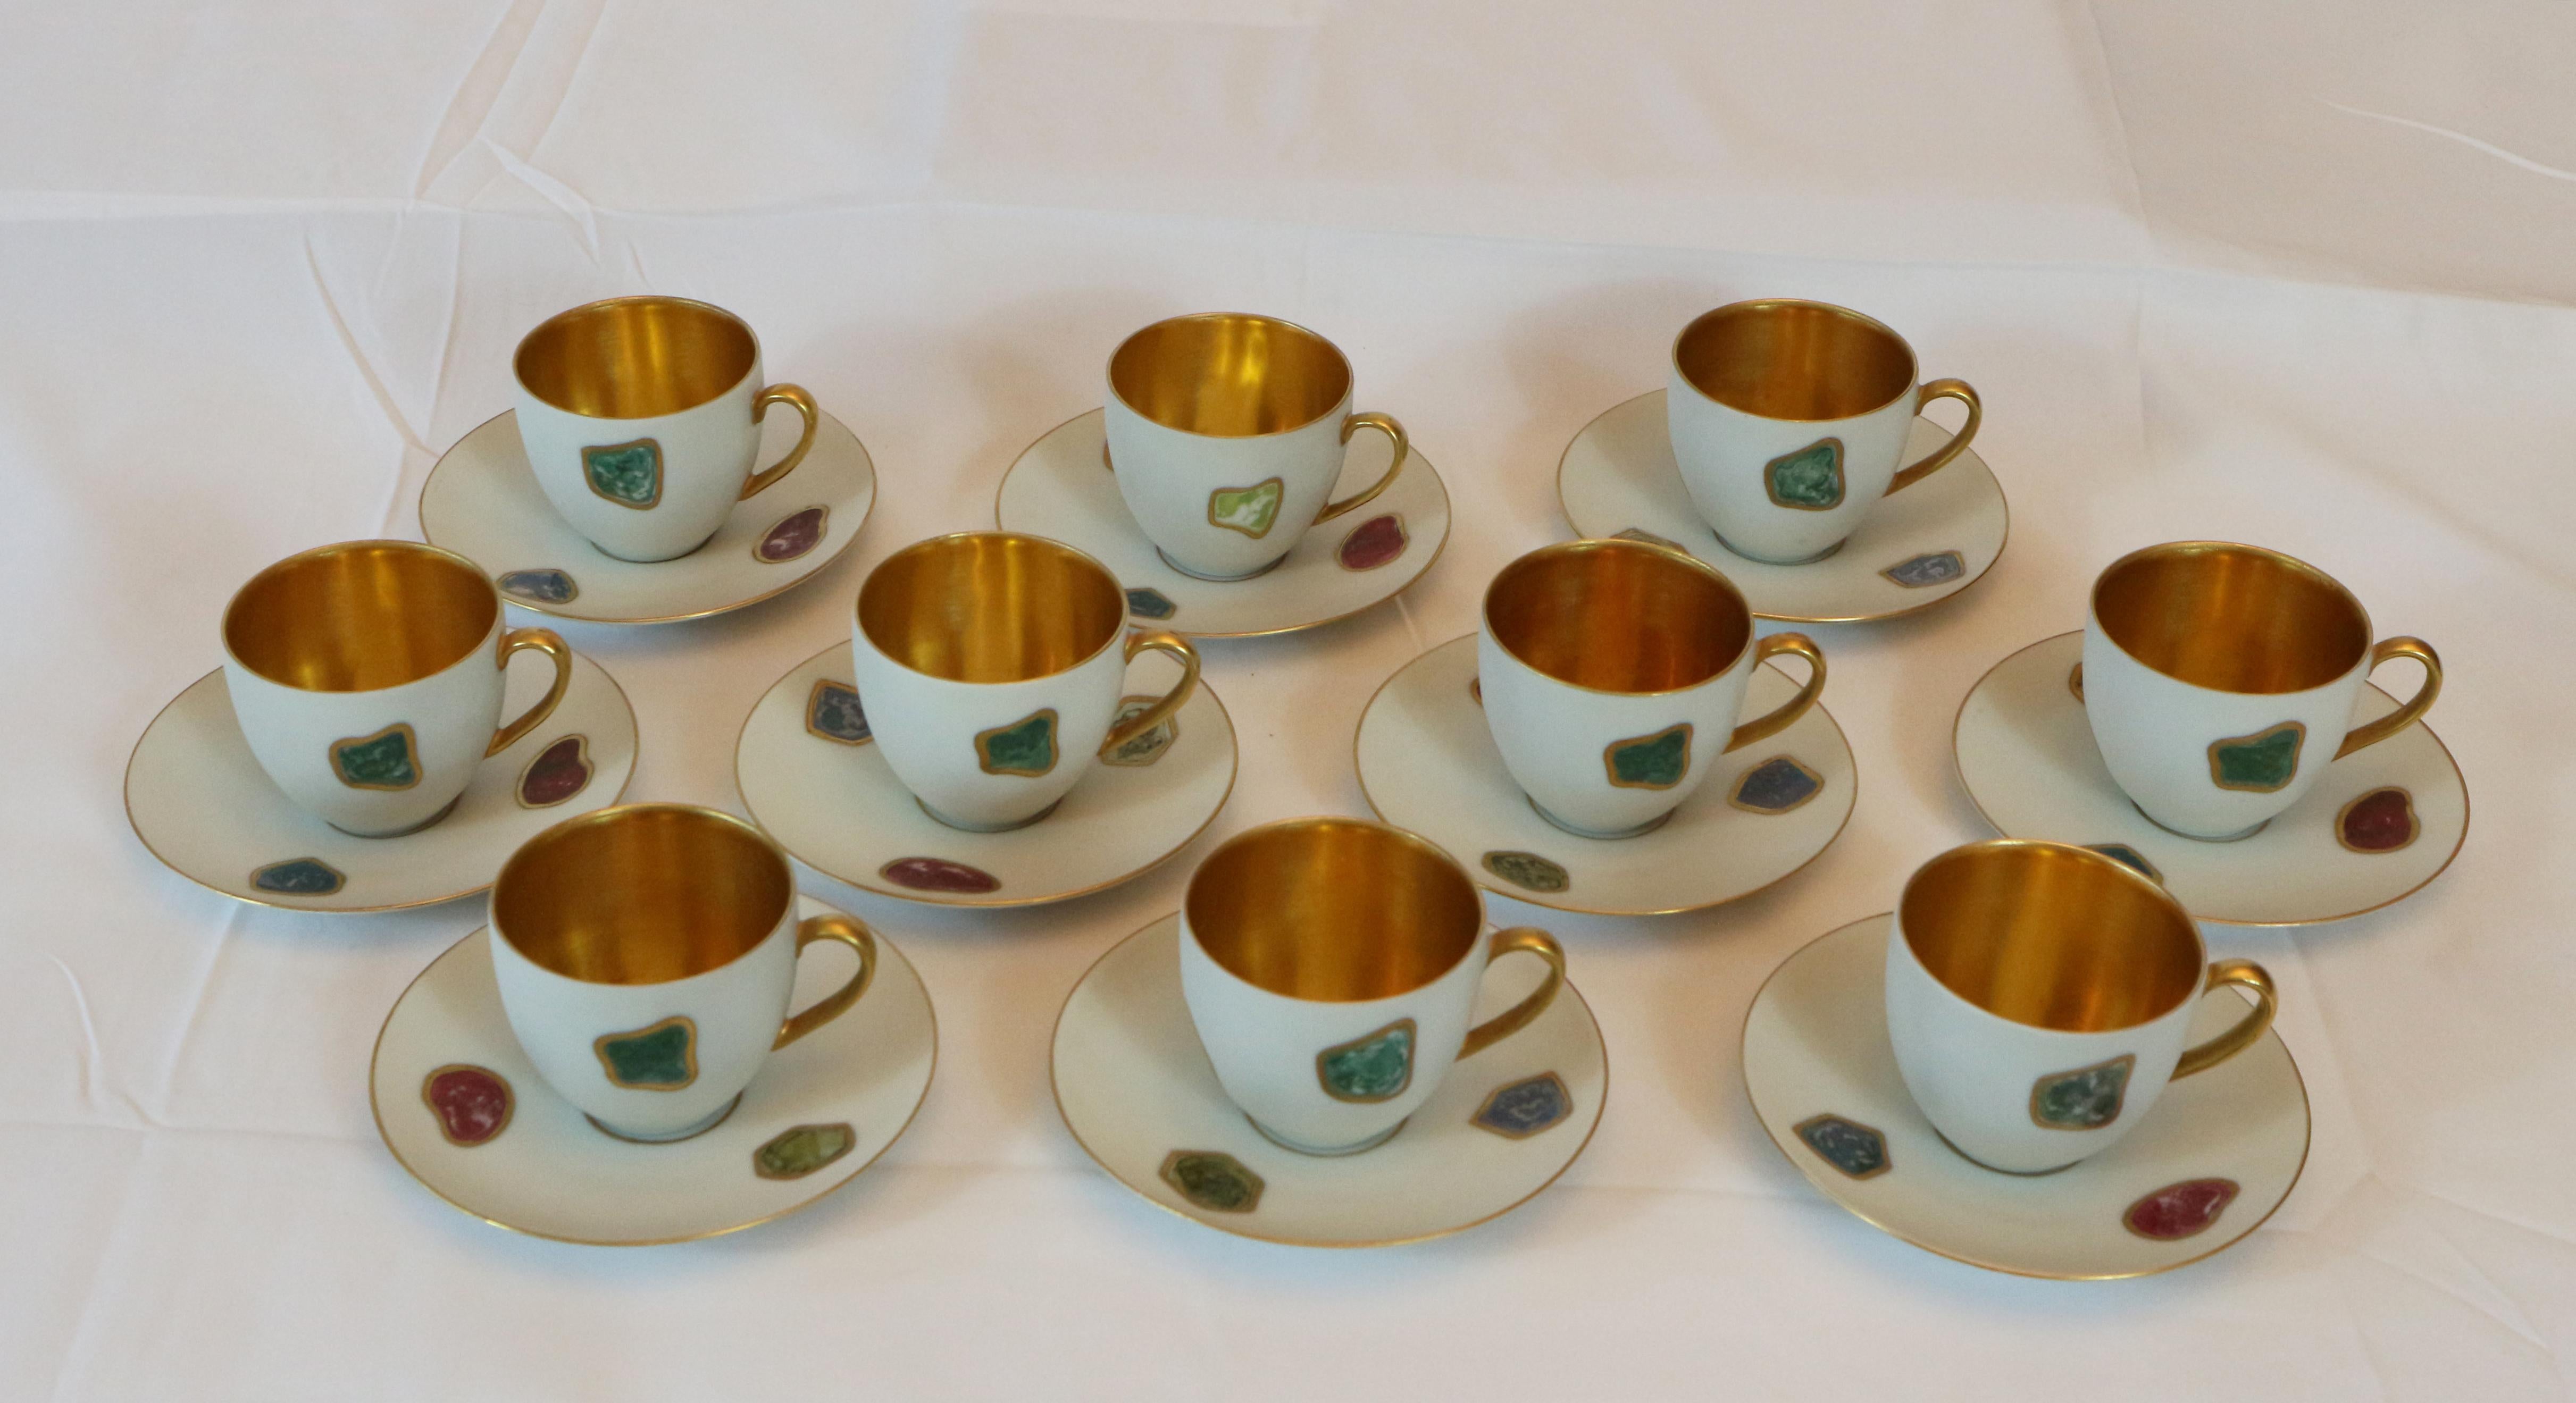 Arrigo Finzi set of 10 porcelain coffee cups painted and gilded .The cups and saucers are entirely painted on a white background with inserts edged in 24-karat gold with beautiful colors in imitation of marble. Internal 24-karat gold.